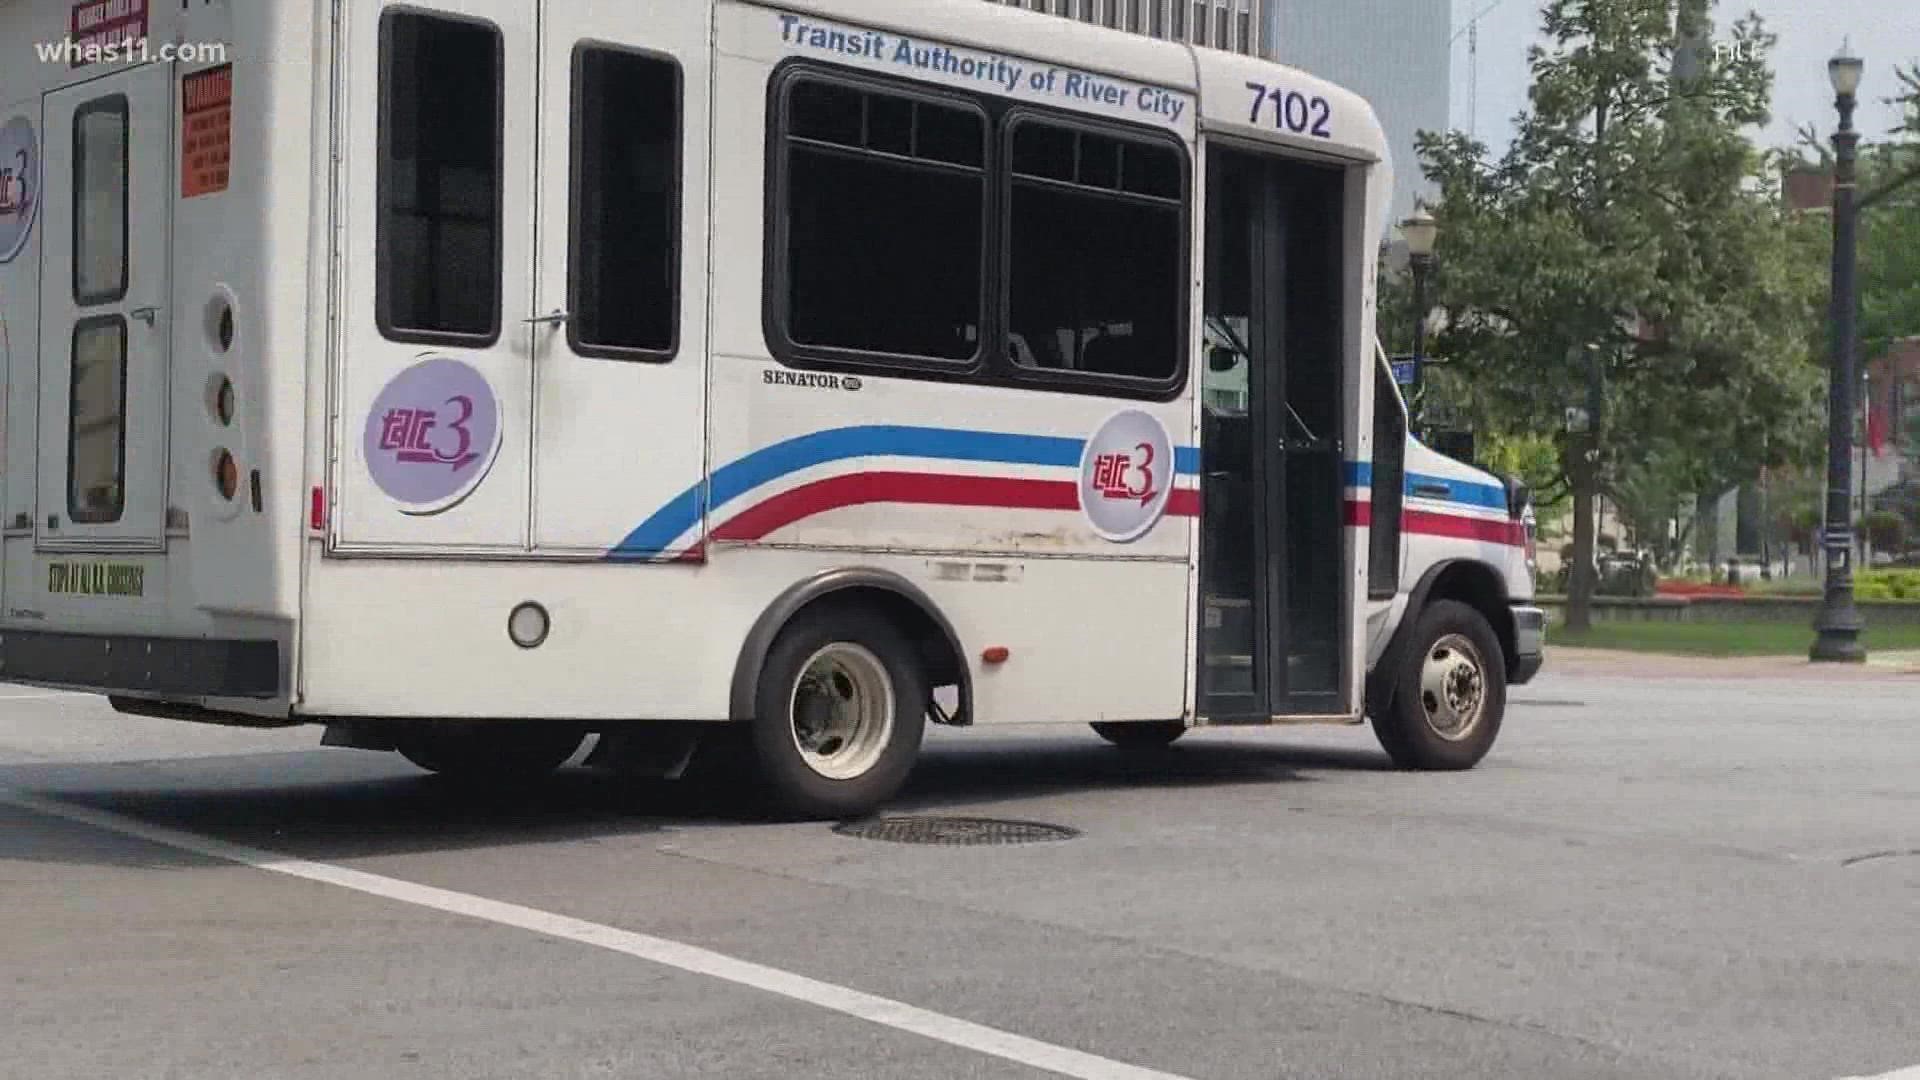 TARC 3 continues to receive complaints after a man was forced to call police when the van didn't show to pick him up and take him home Saturday night.